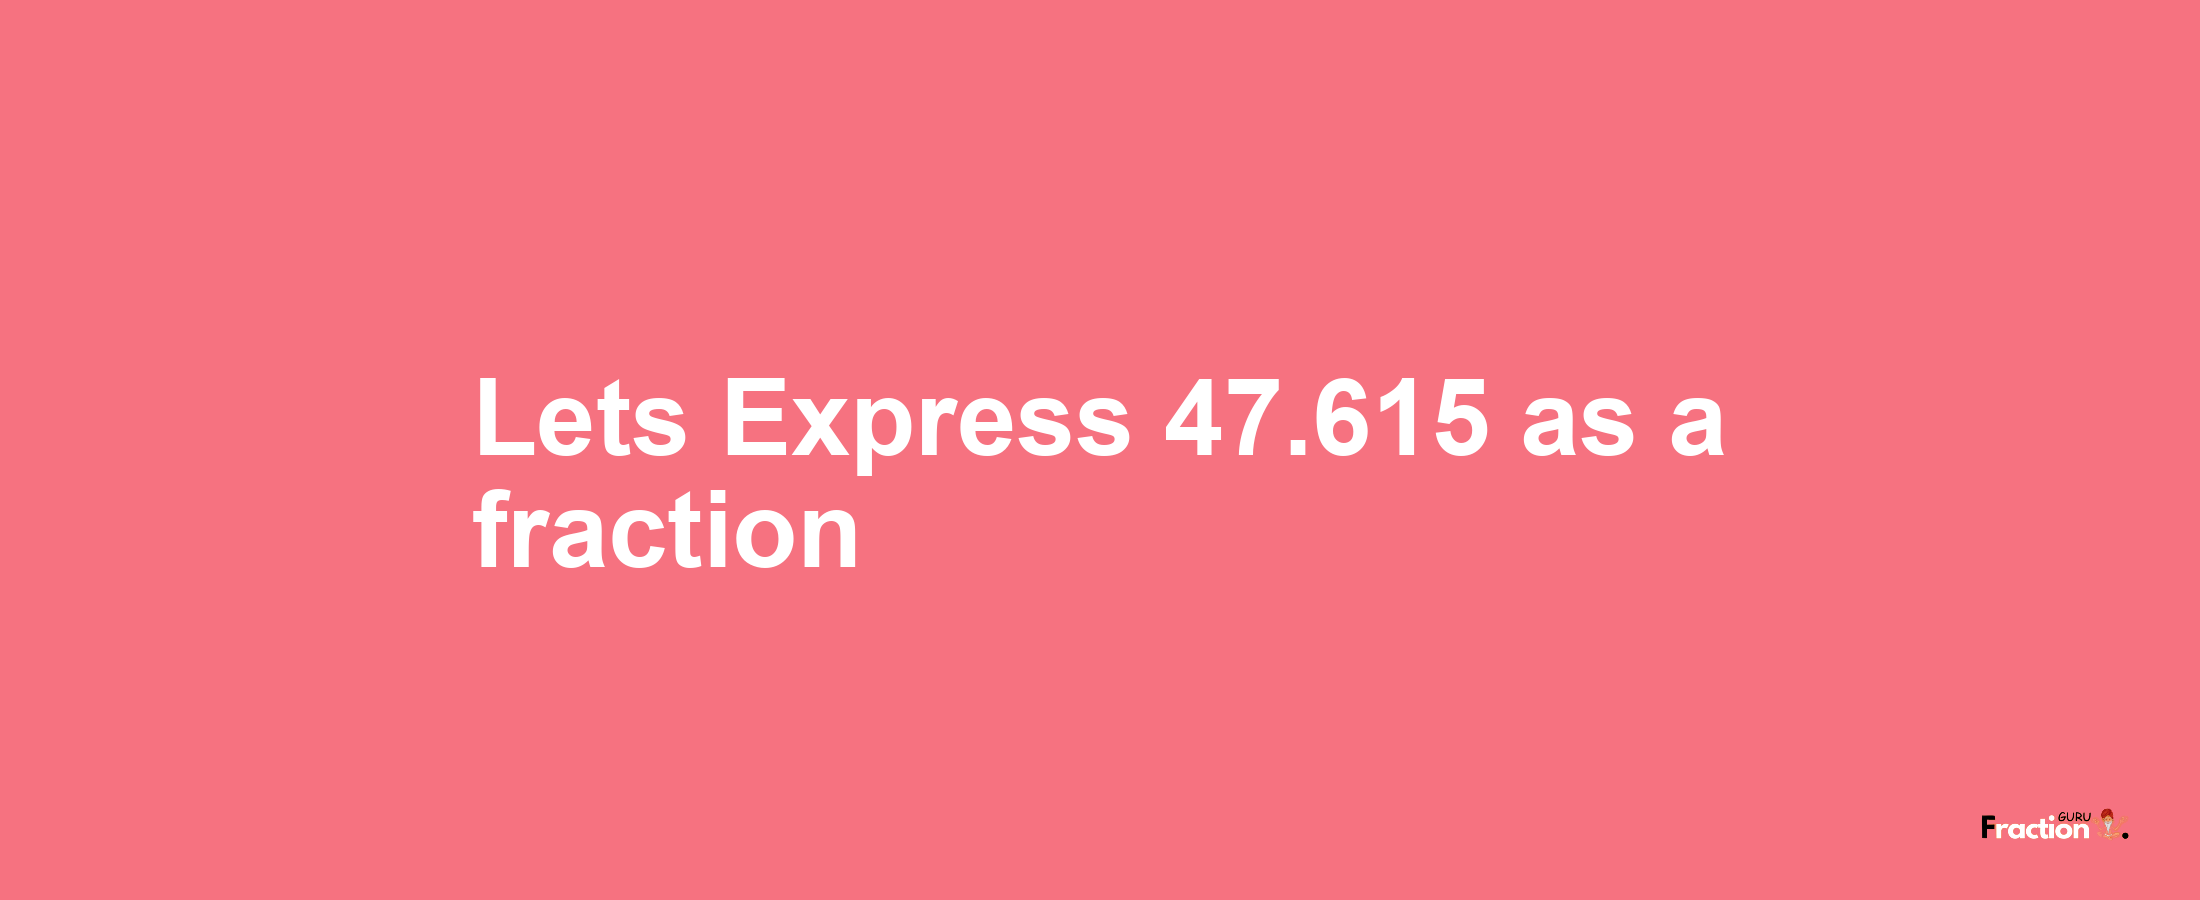 Lets Express 47.615 as afraction